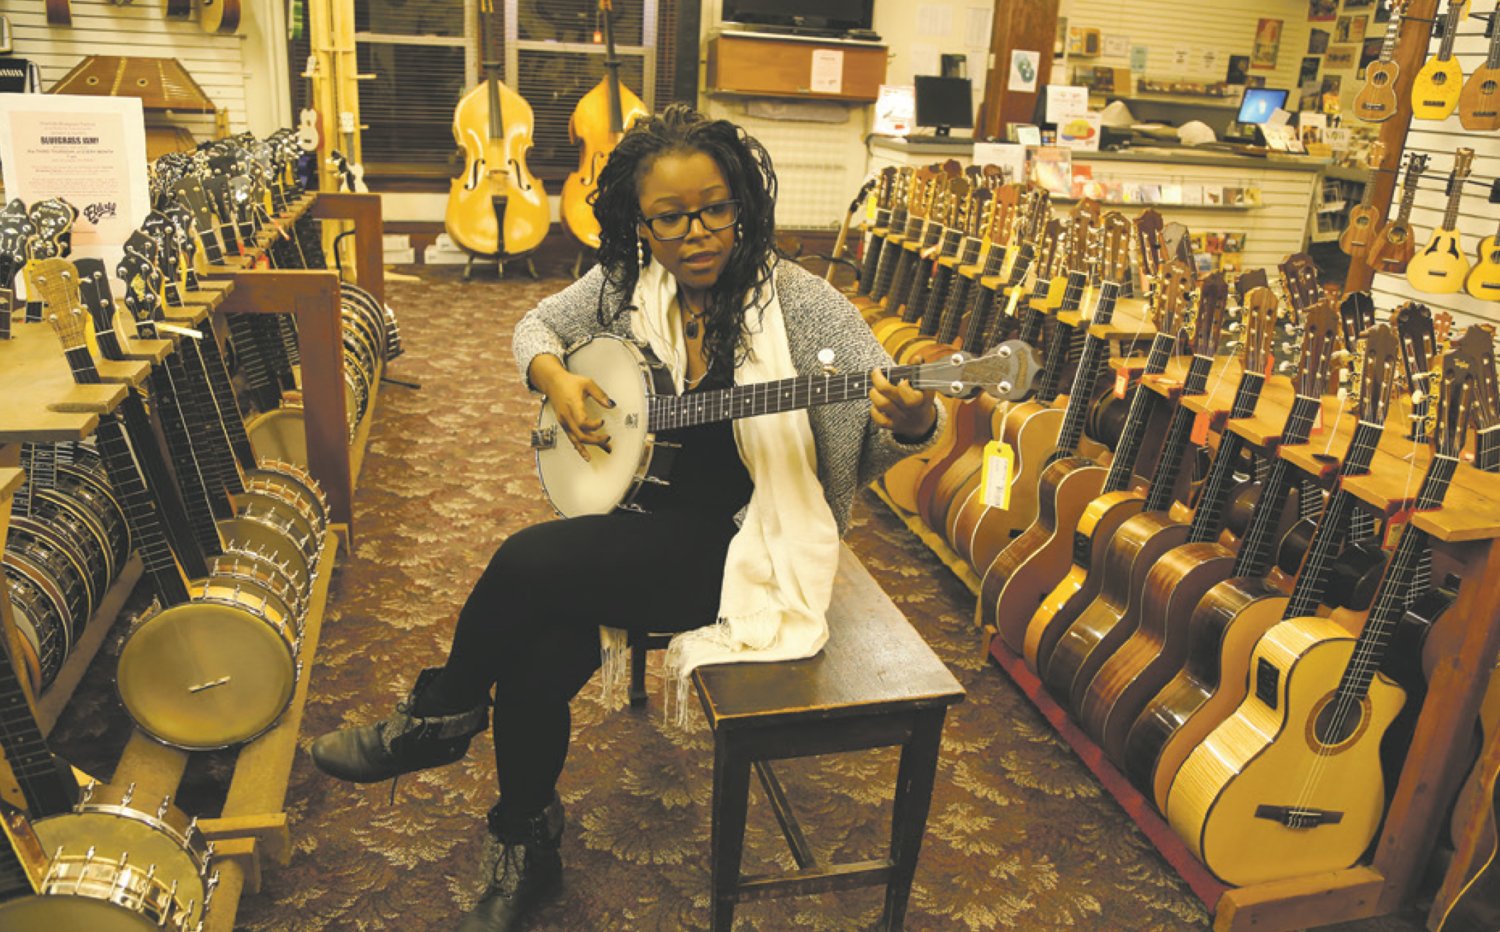 Lillian Werbin has seen the acoustic music world grow younger and more diverse in recent years. "I was raised with all sorts of good music from every decade," she said. "I’m happy to listen to almost anything."